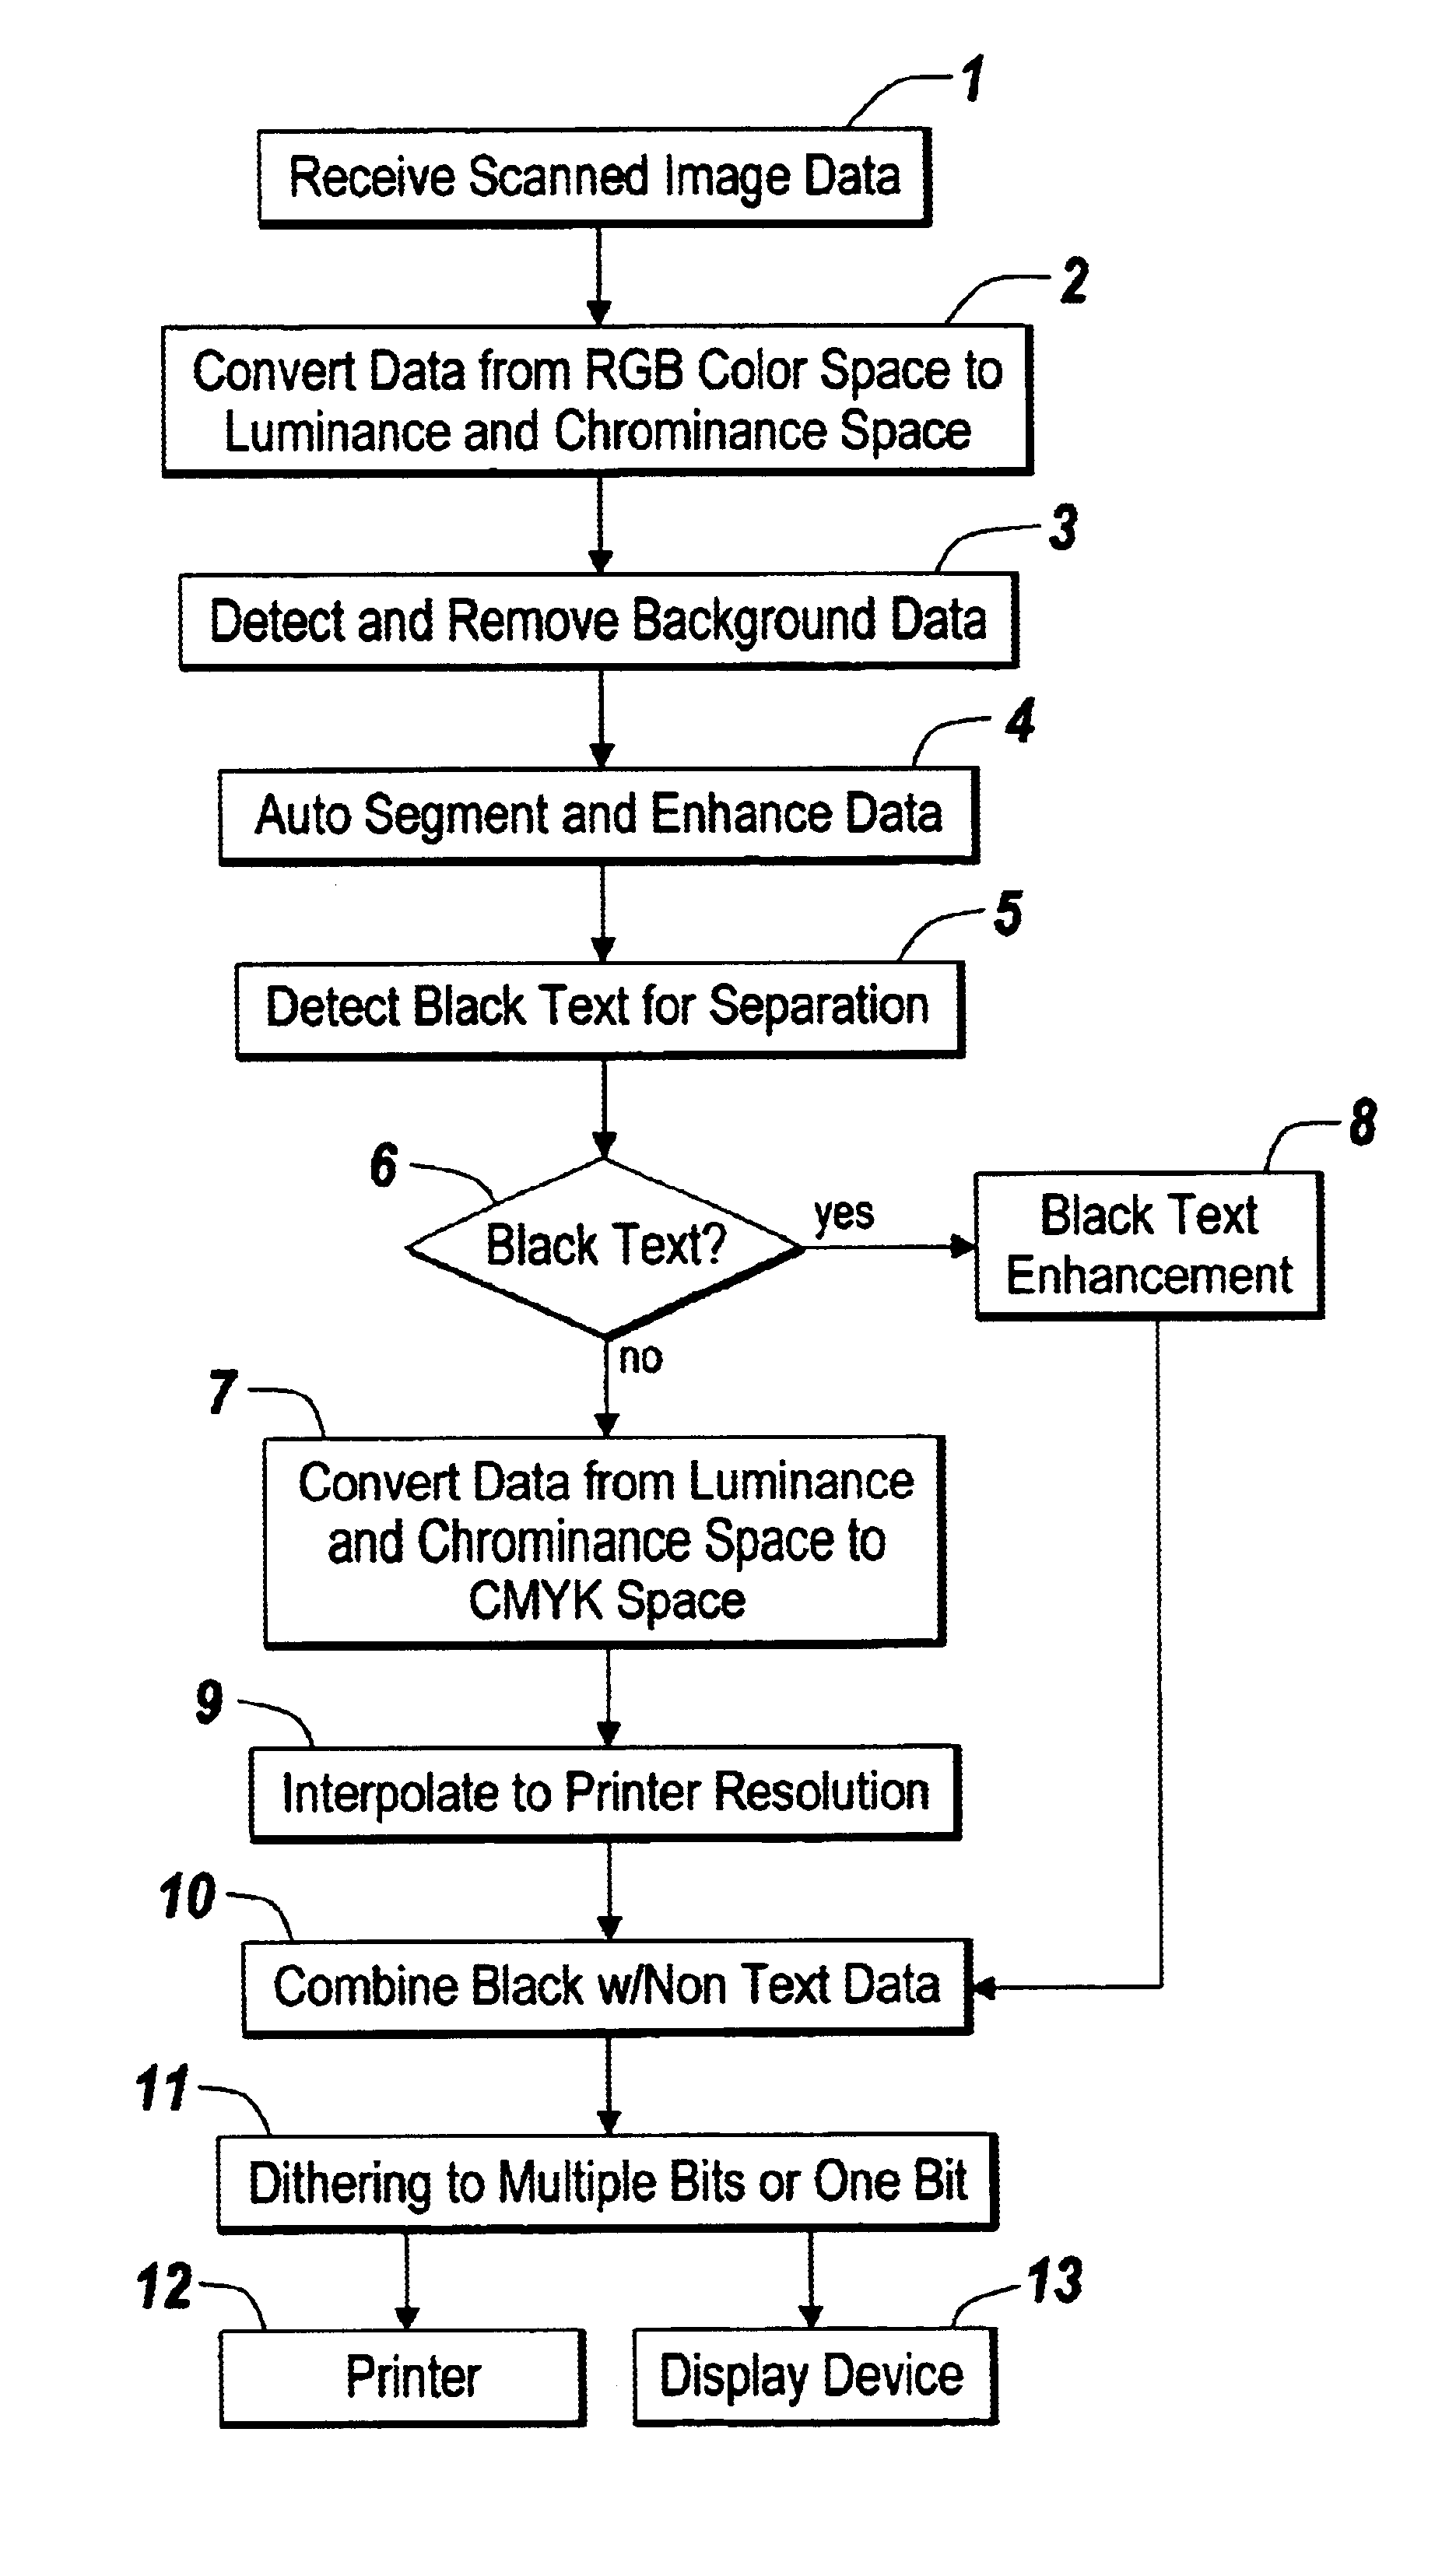 System and method for color copy image processing